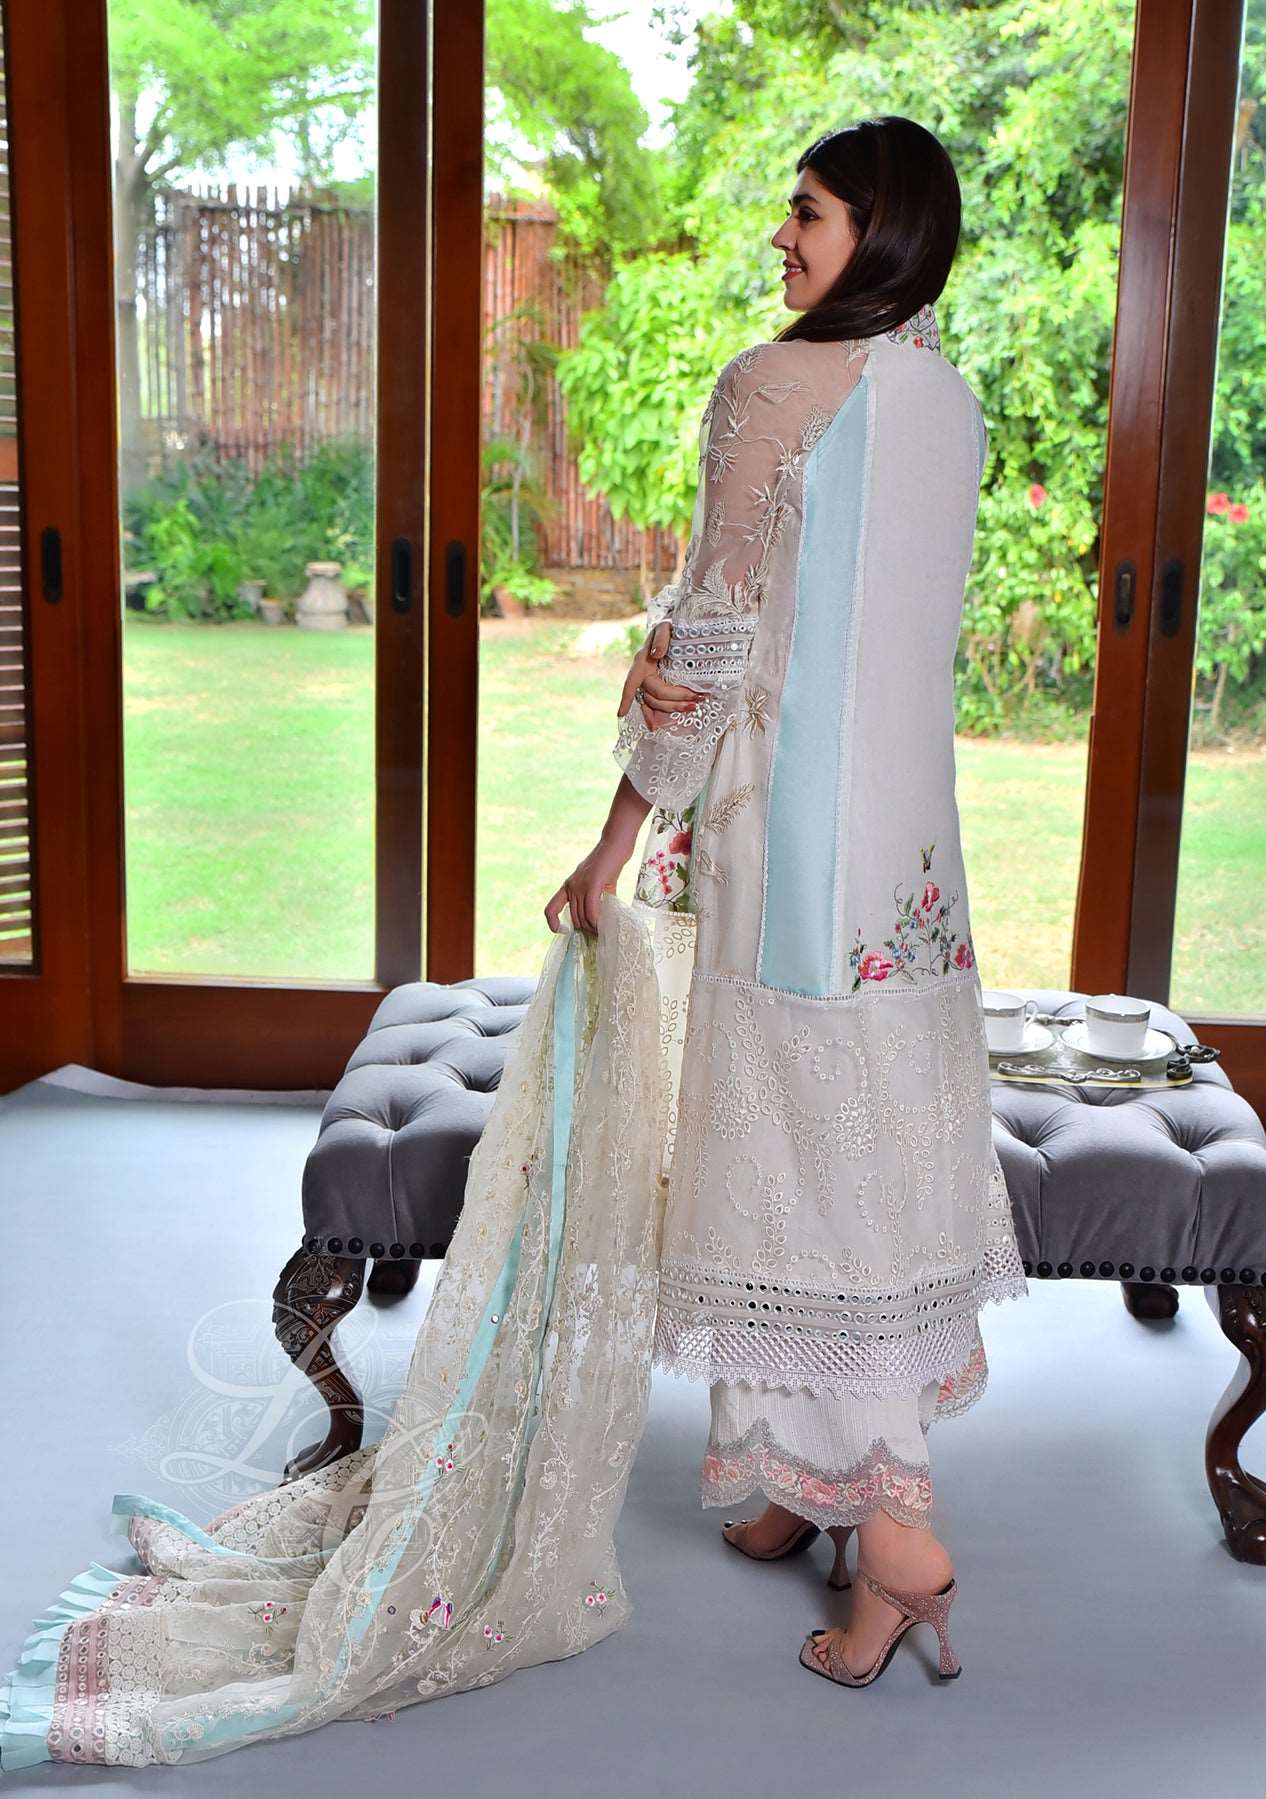 Off white kalidar paired with culottes and organza dupatta